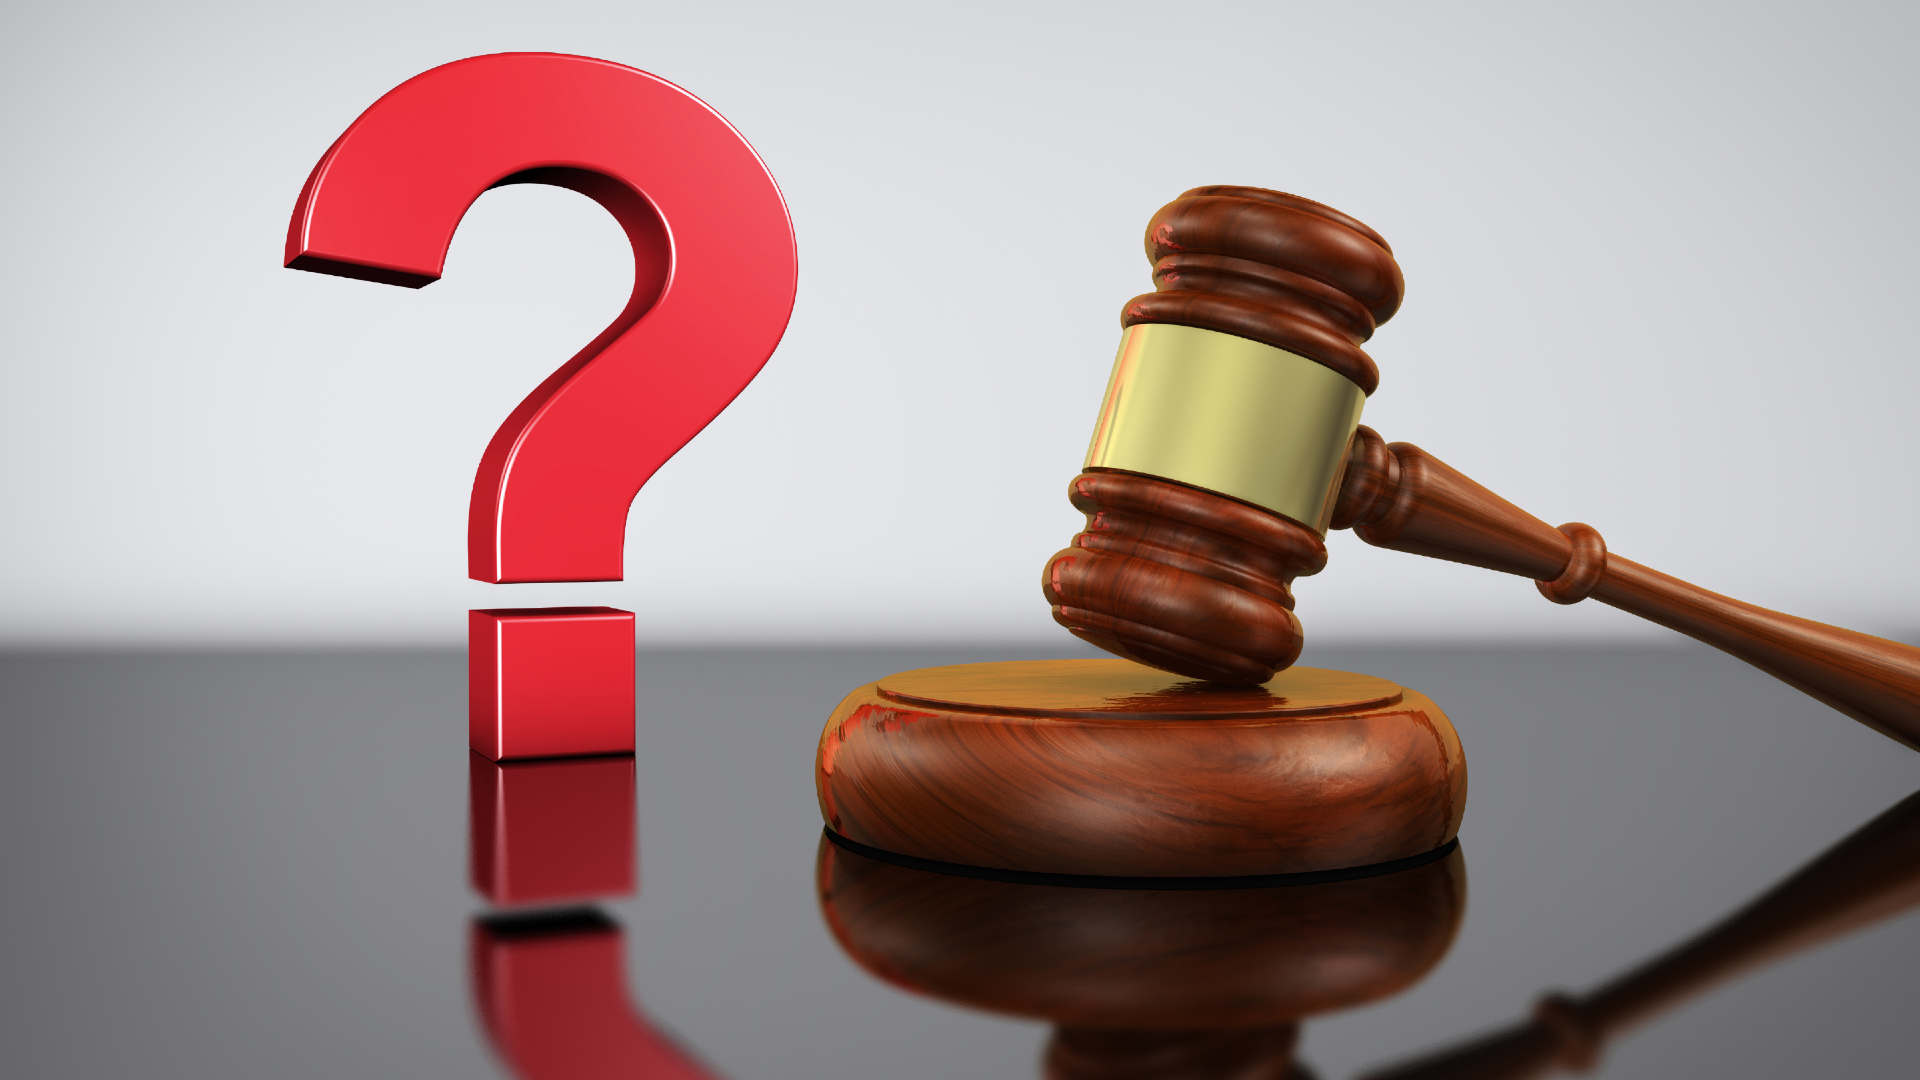 A gavel and a question mark